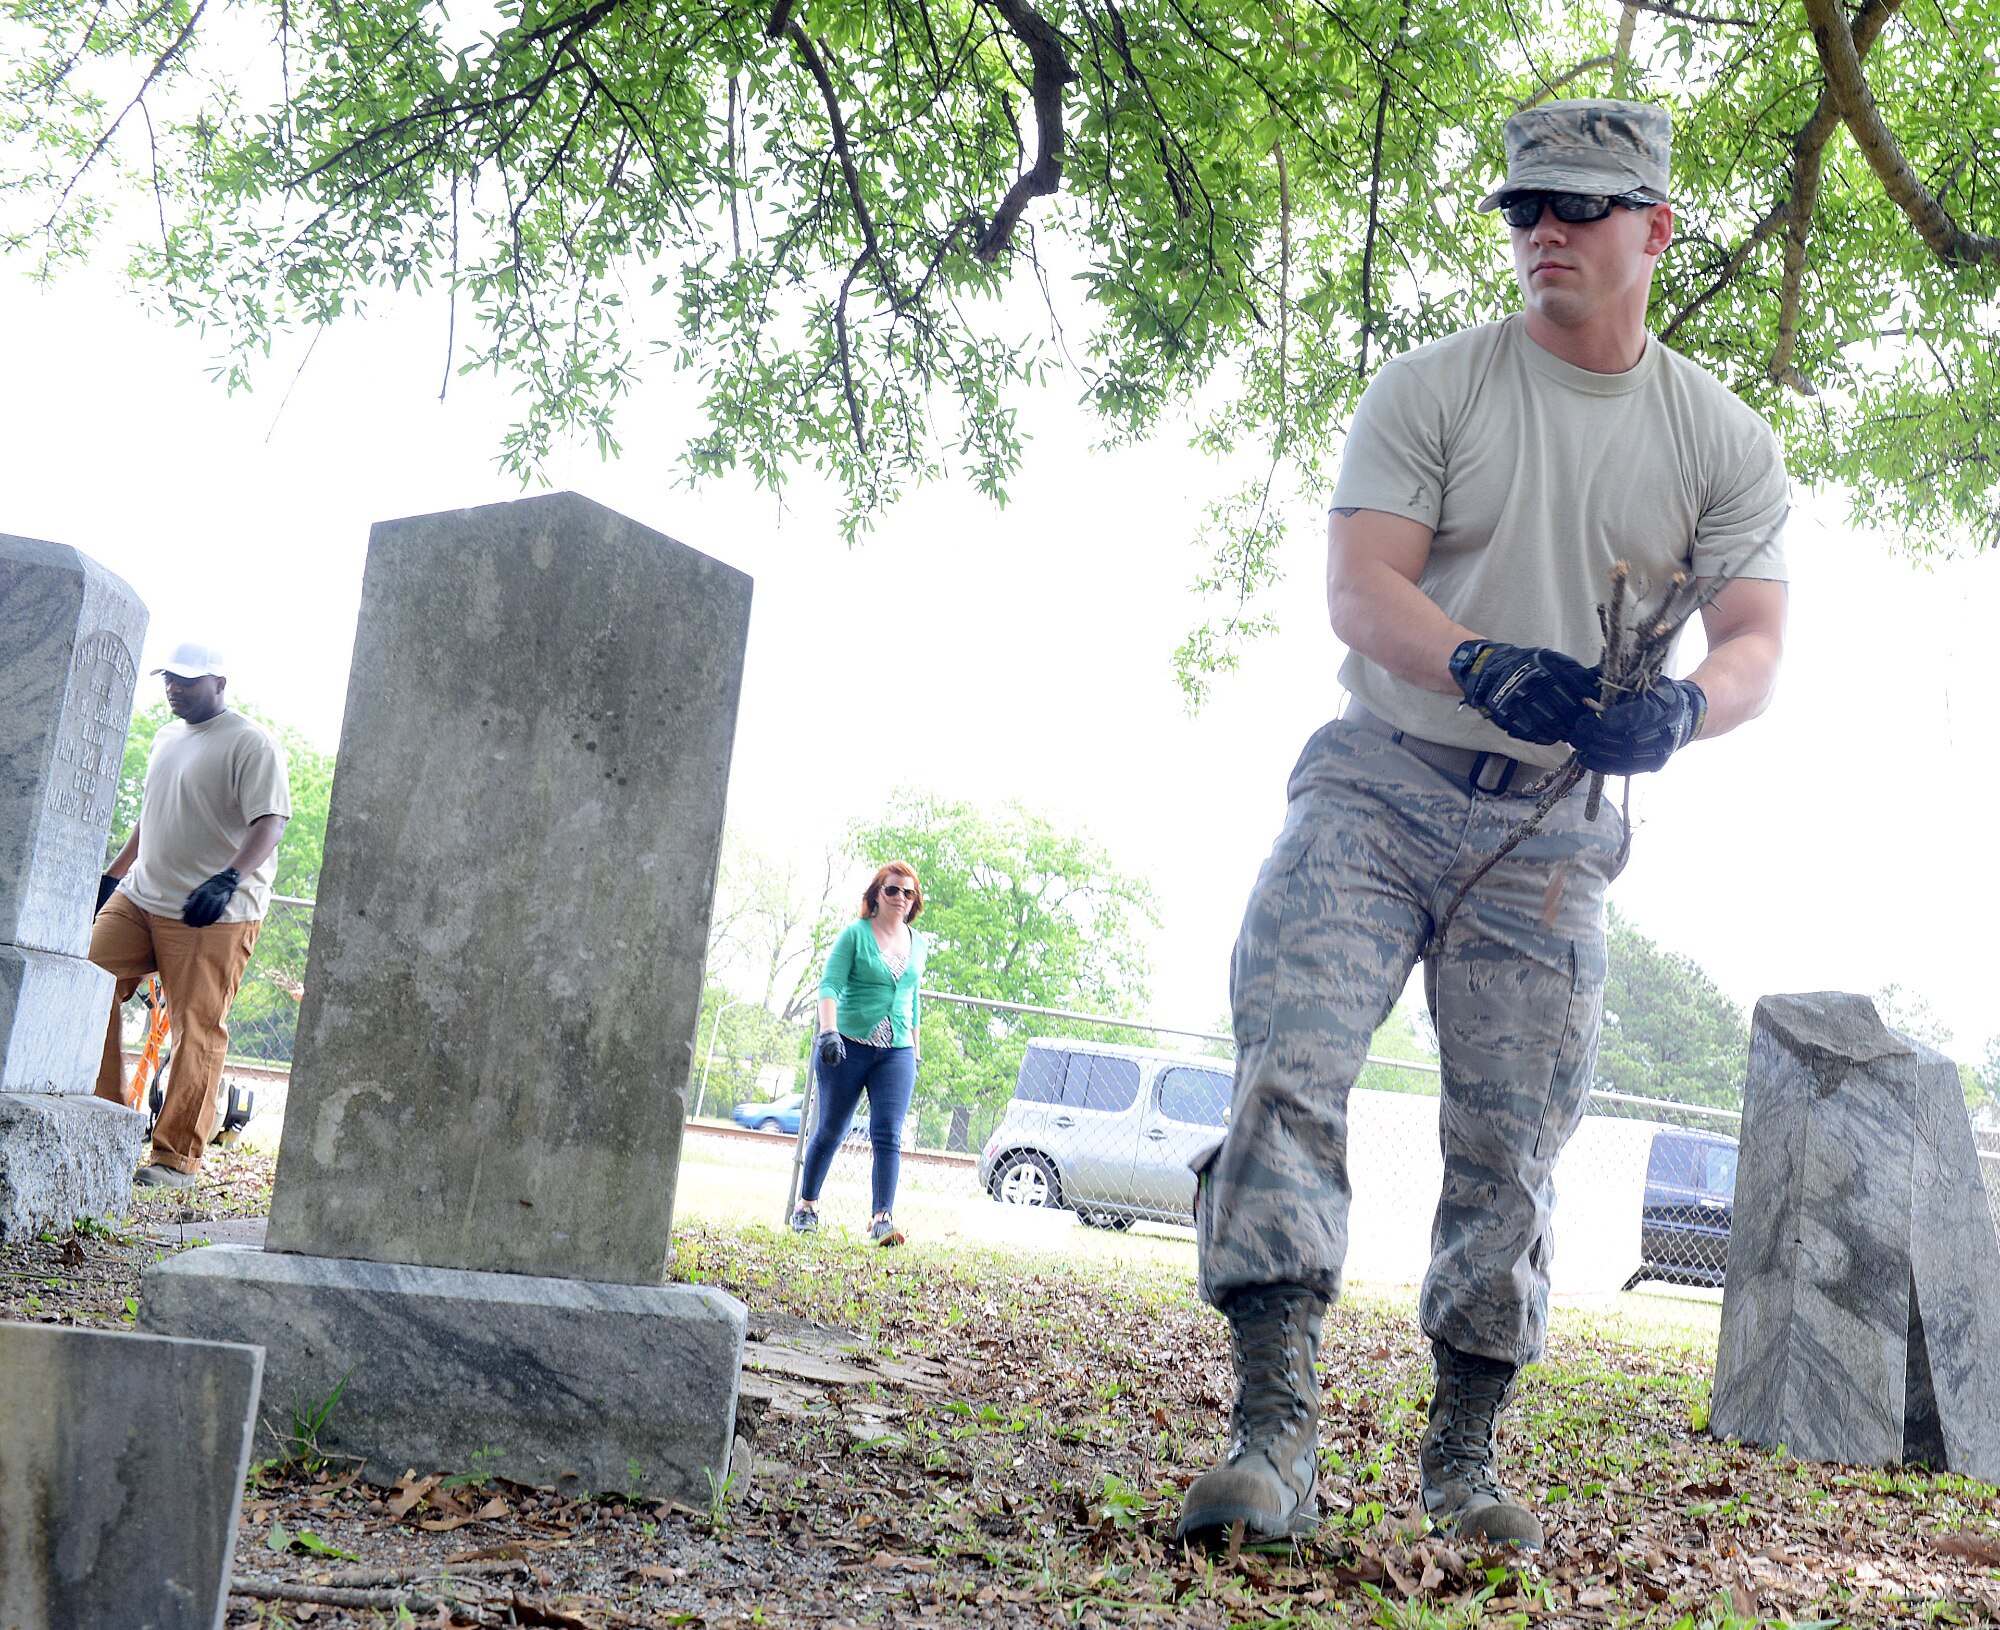 Senior Airman Will Jenkins, 116th Air Control Wing maintenance squadron, helps with the Bryant Cemetery clean up, April 20, 2016. (U.S. Air Force photo by Tommie Horton)
